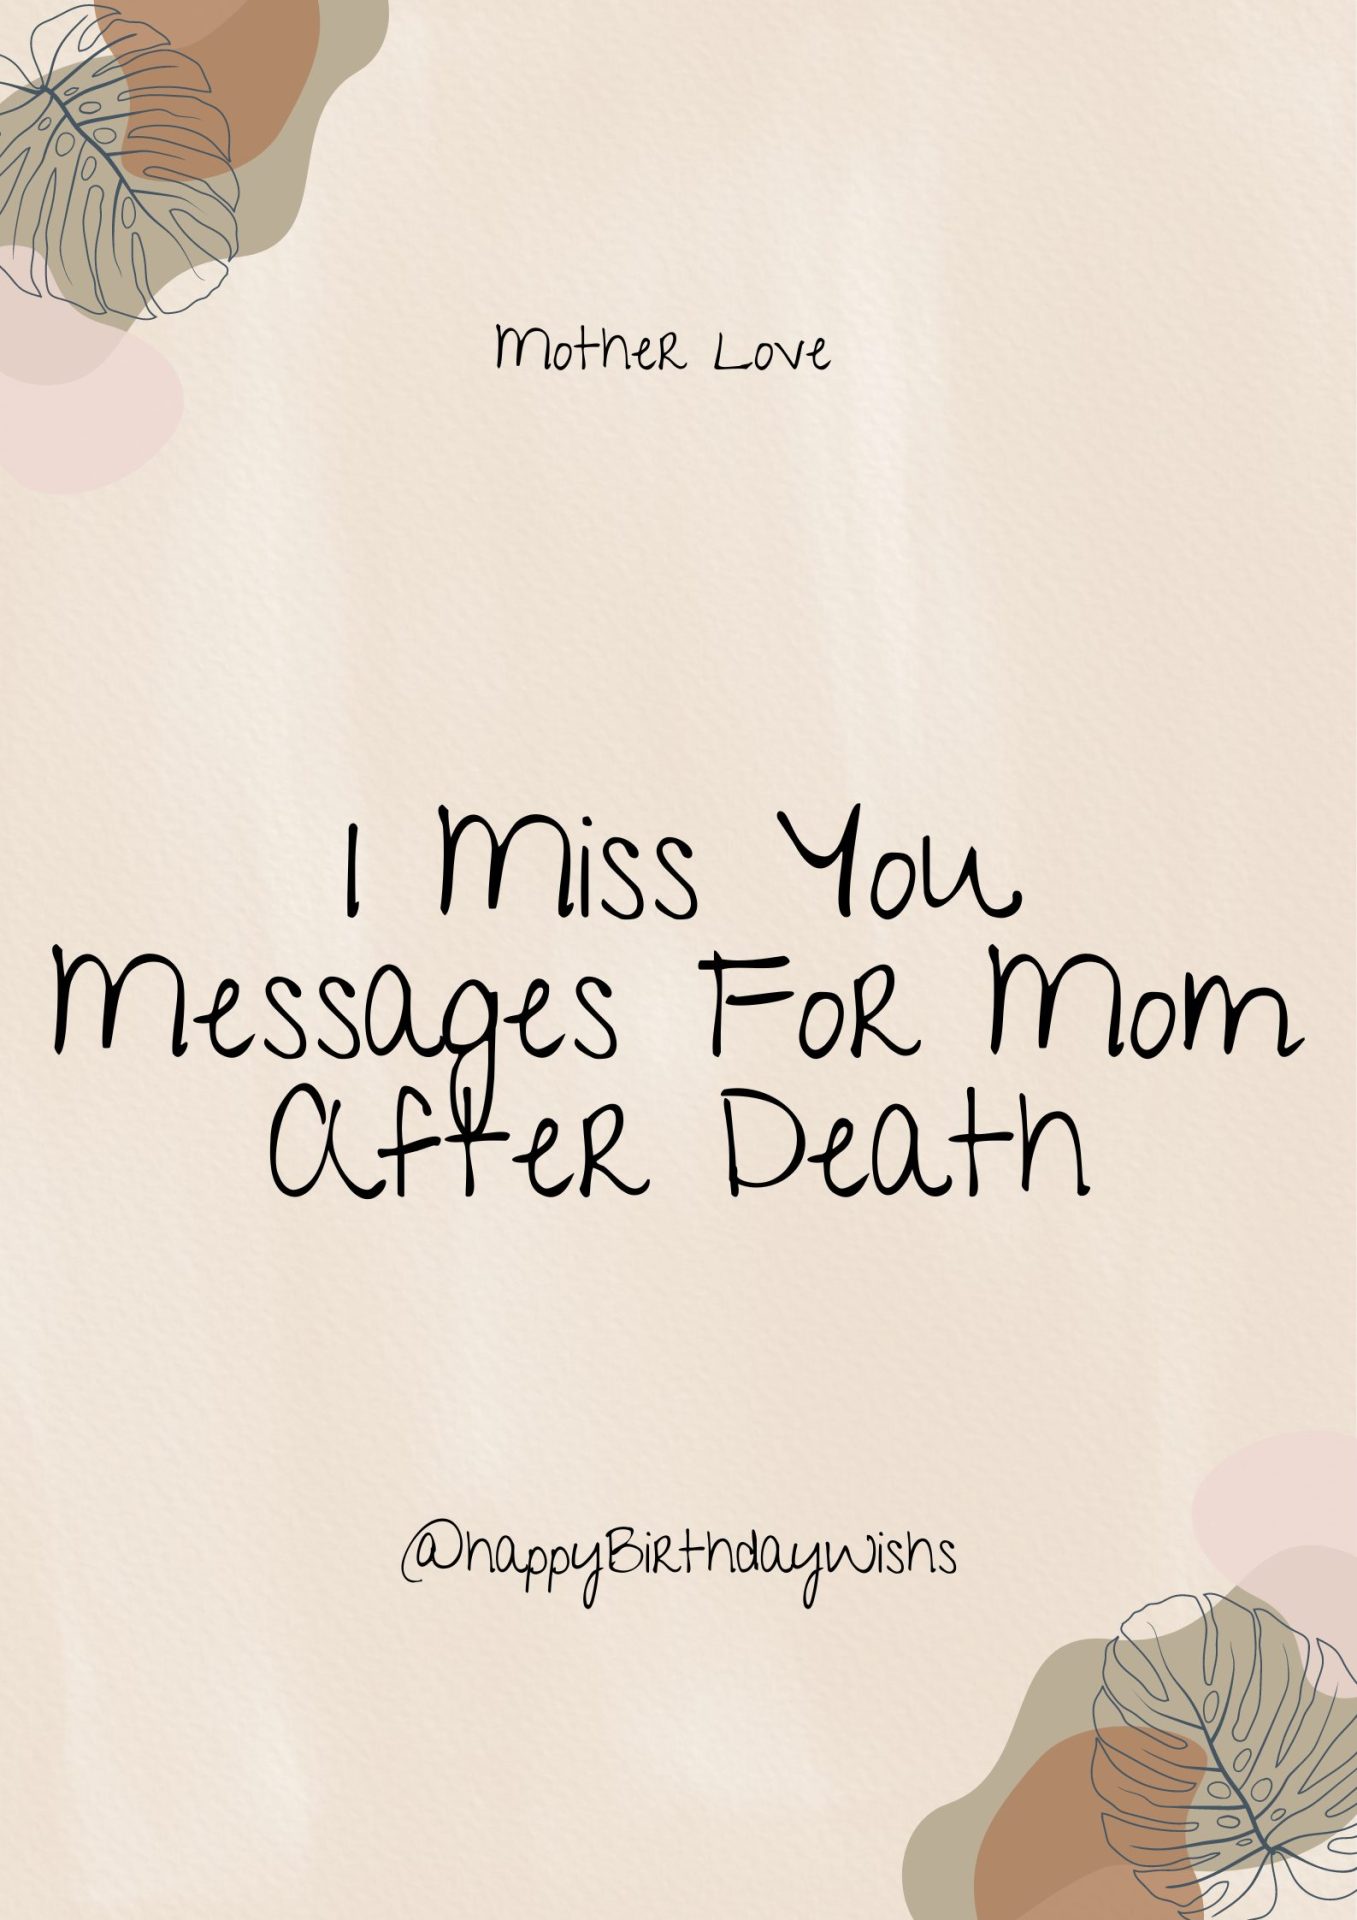 I Miss You Messages For Mom After Death